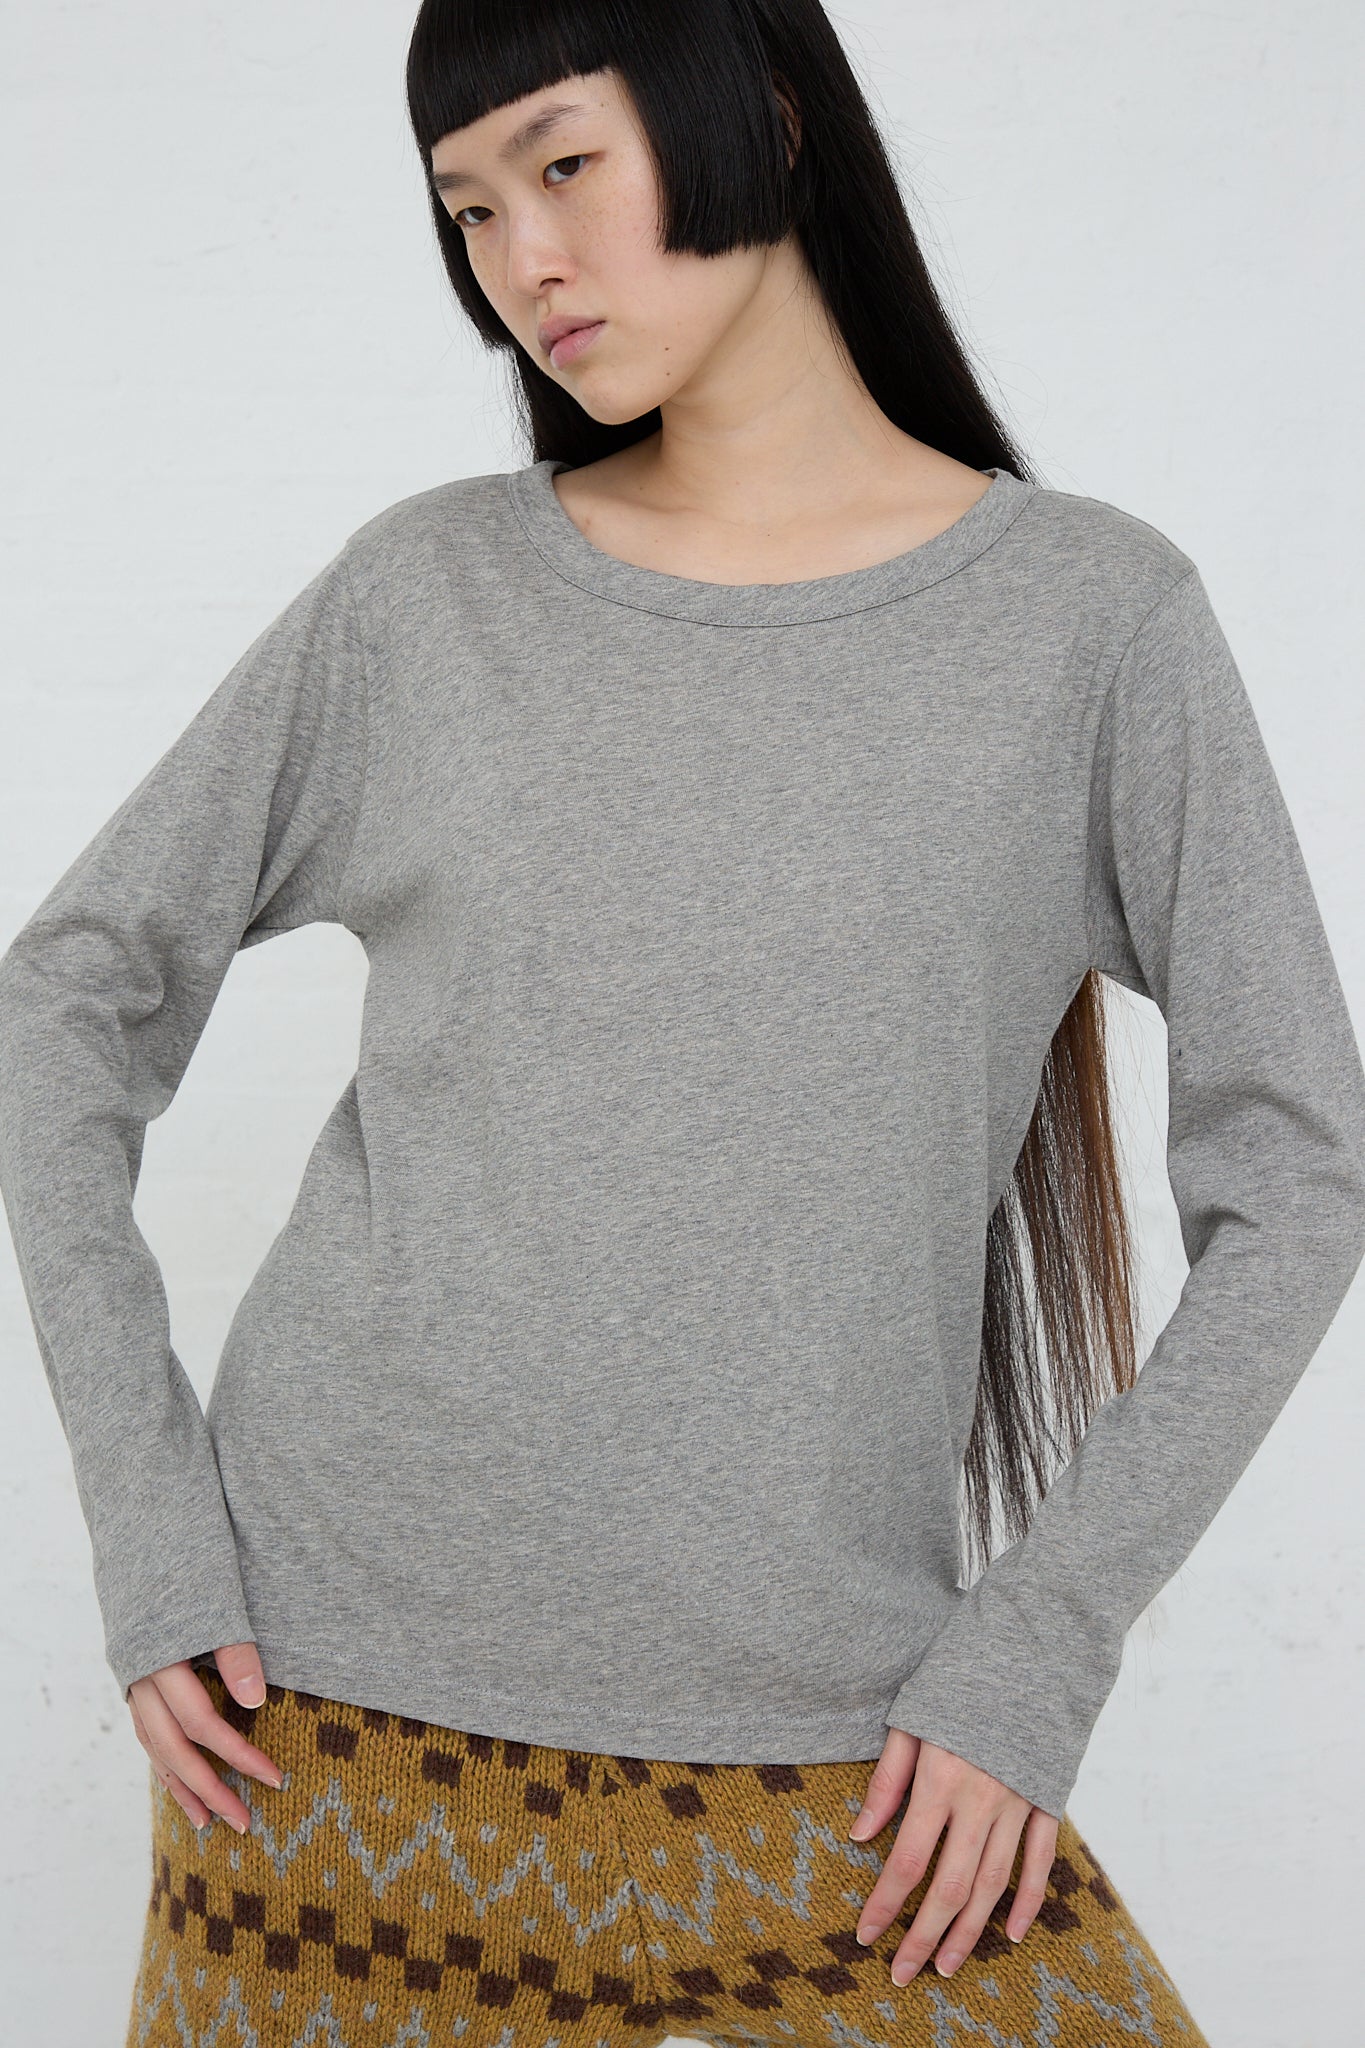 A woman wearing an Ichi Cotton Knit Pullover in Gray.